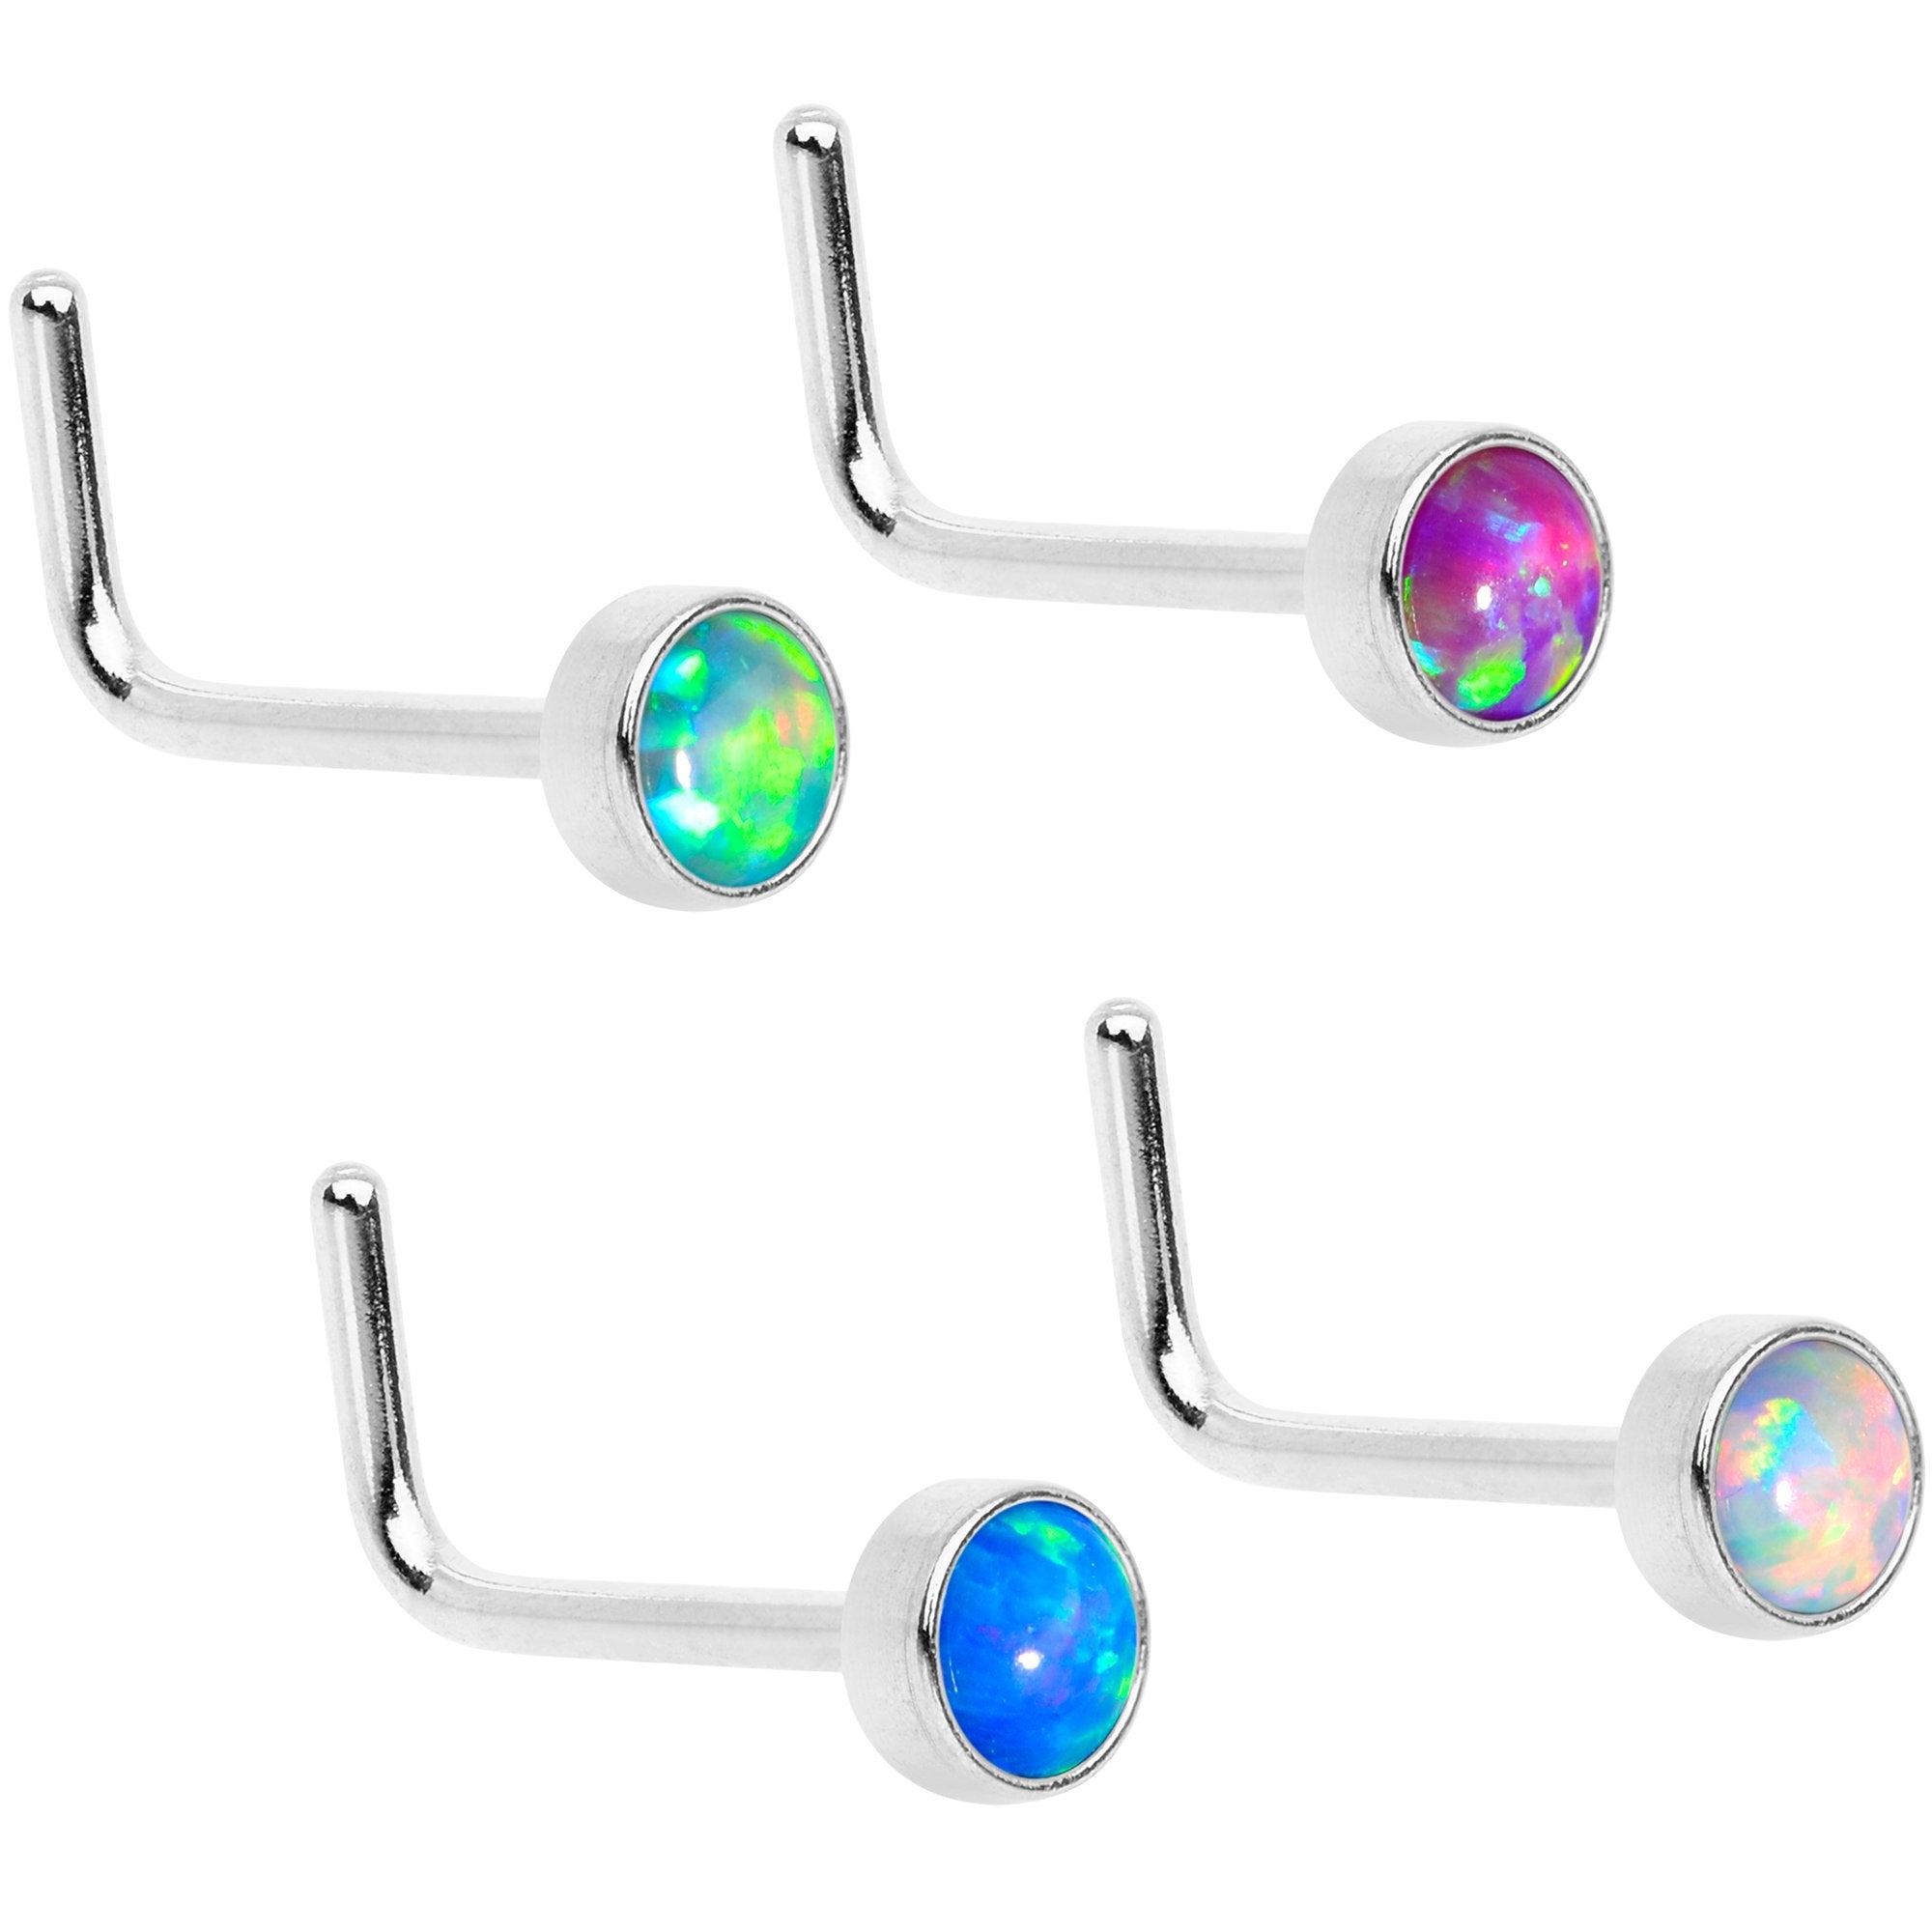 Multi Color 3mm Synthetic Opal Press Fit L Shaped Nose Ring 4 Pack Set